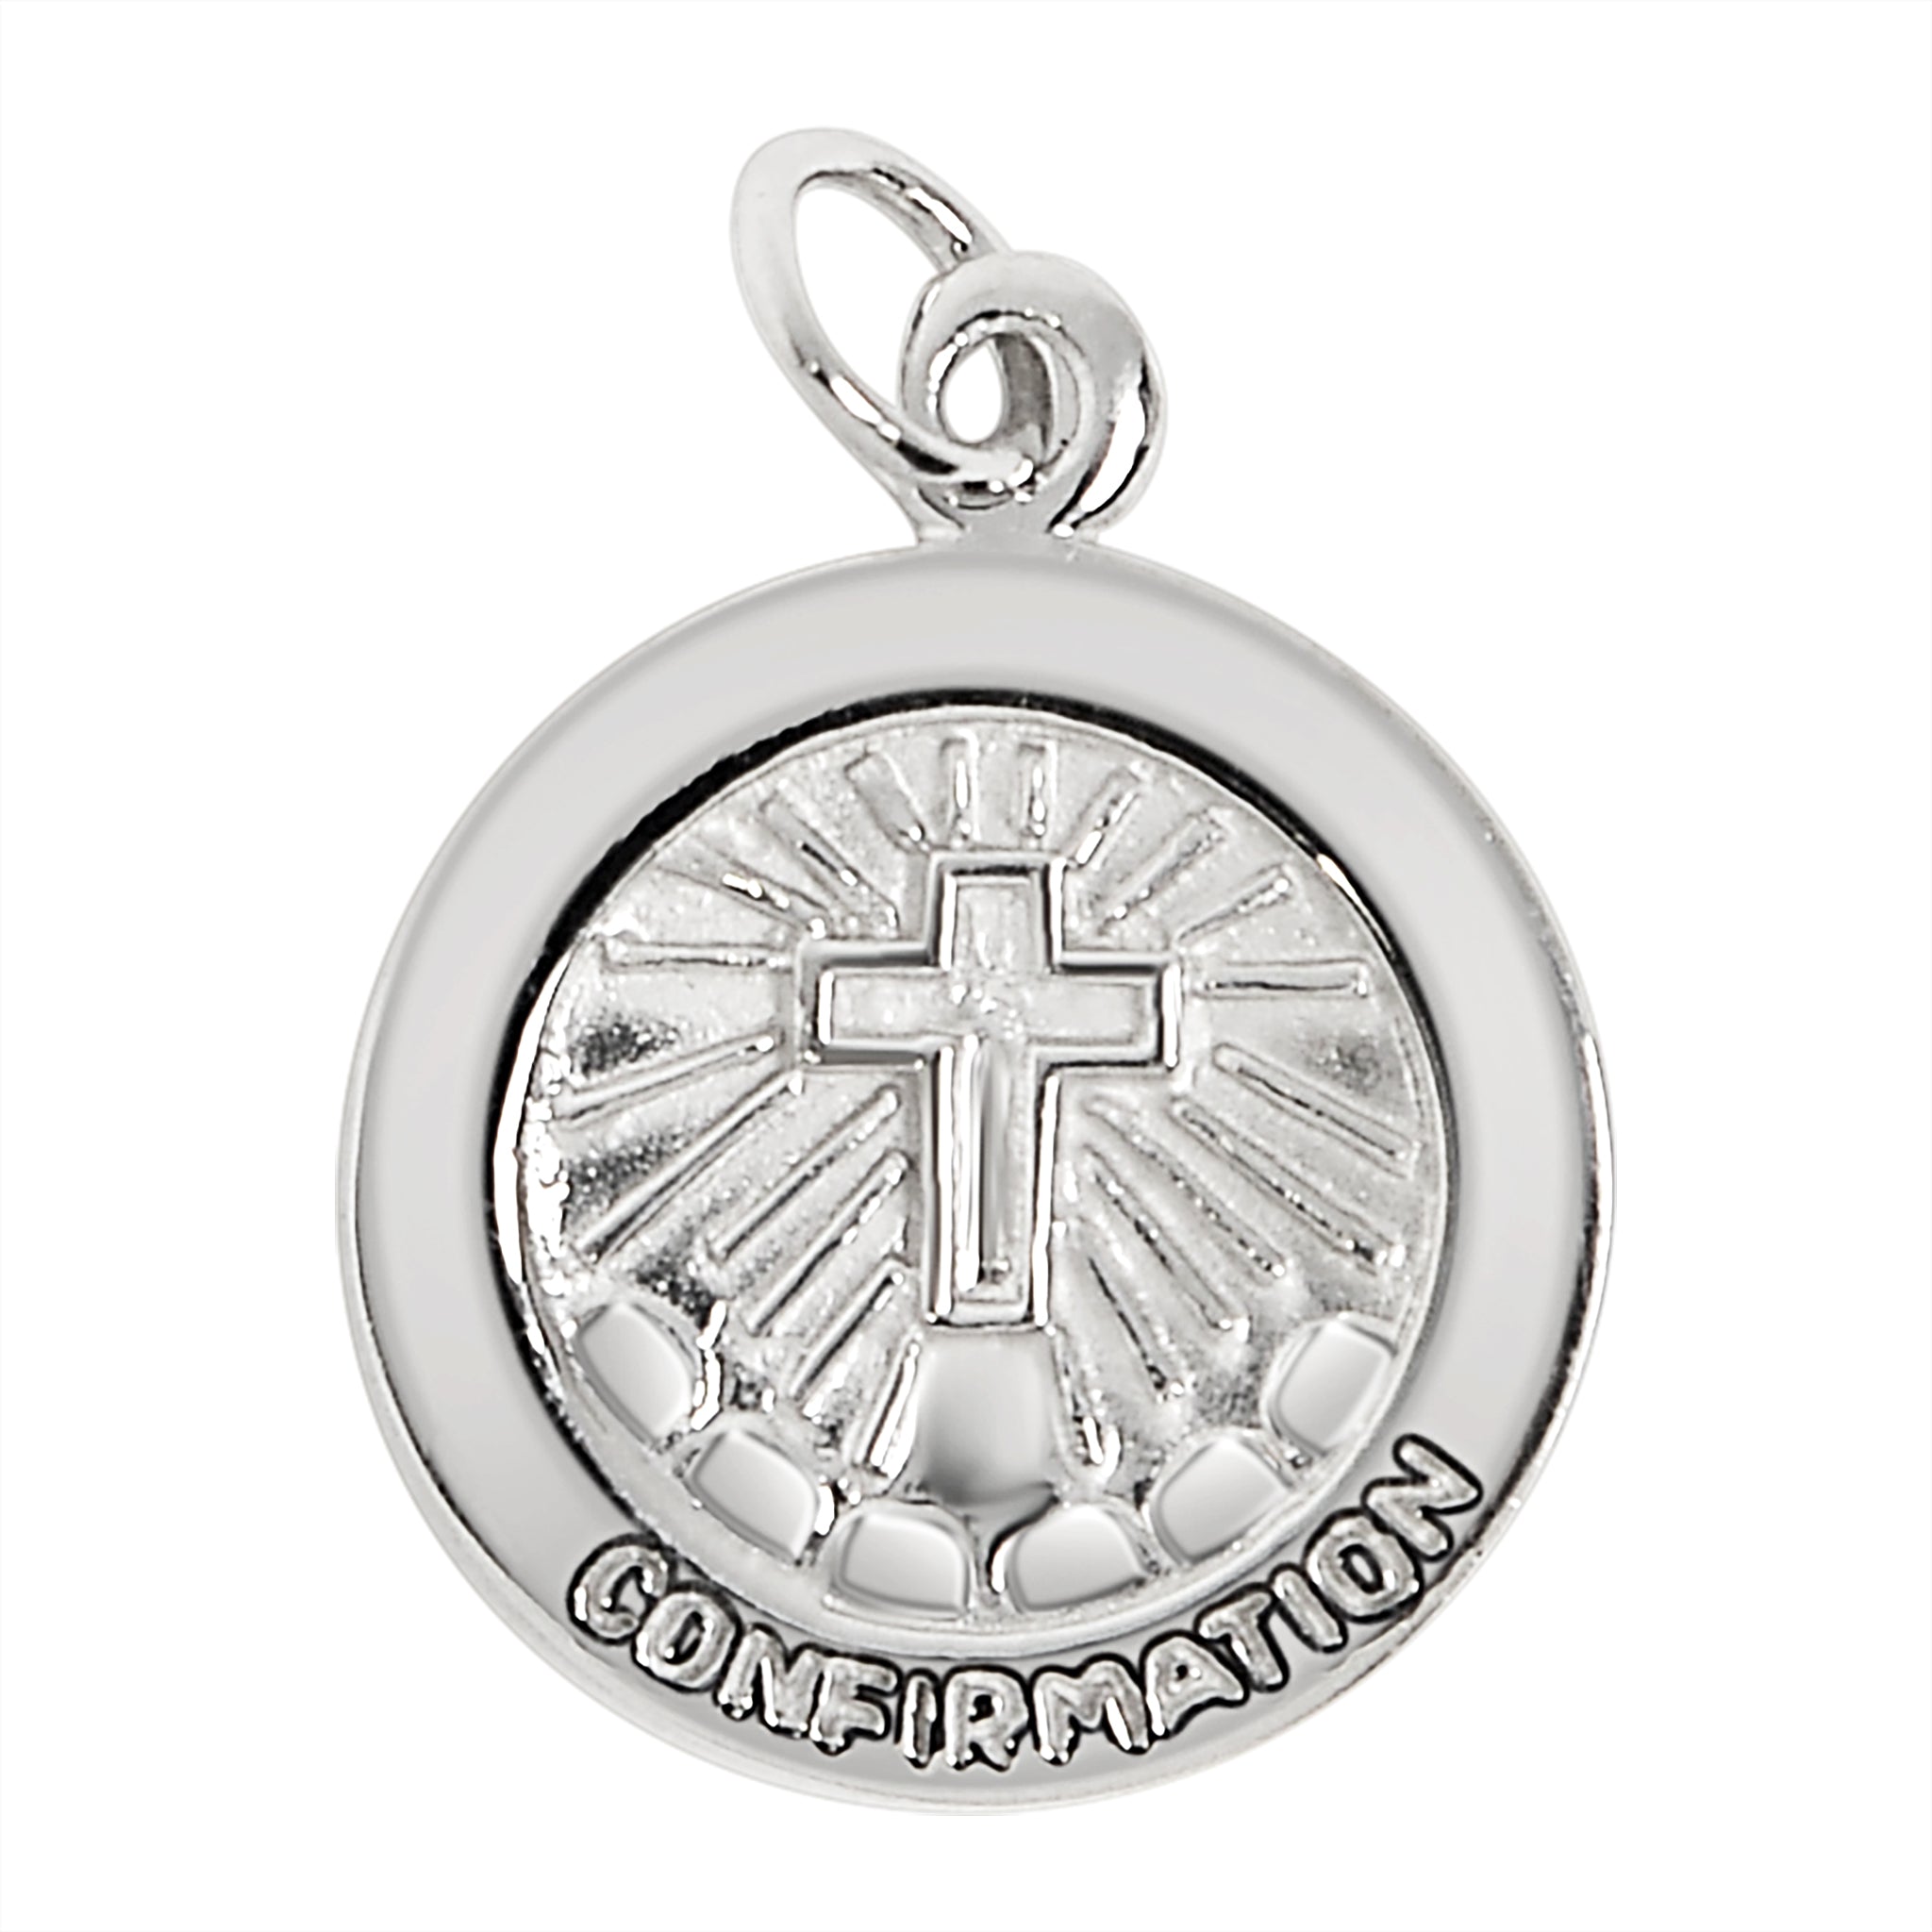 Sterling Silver "Confirmation" Cross Pendant / SSP0176-Handmade Silver Necklace- Hypoallergenic Jewelry- Charm Pendent- Handmade Pendant- Gift Pendent